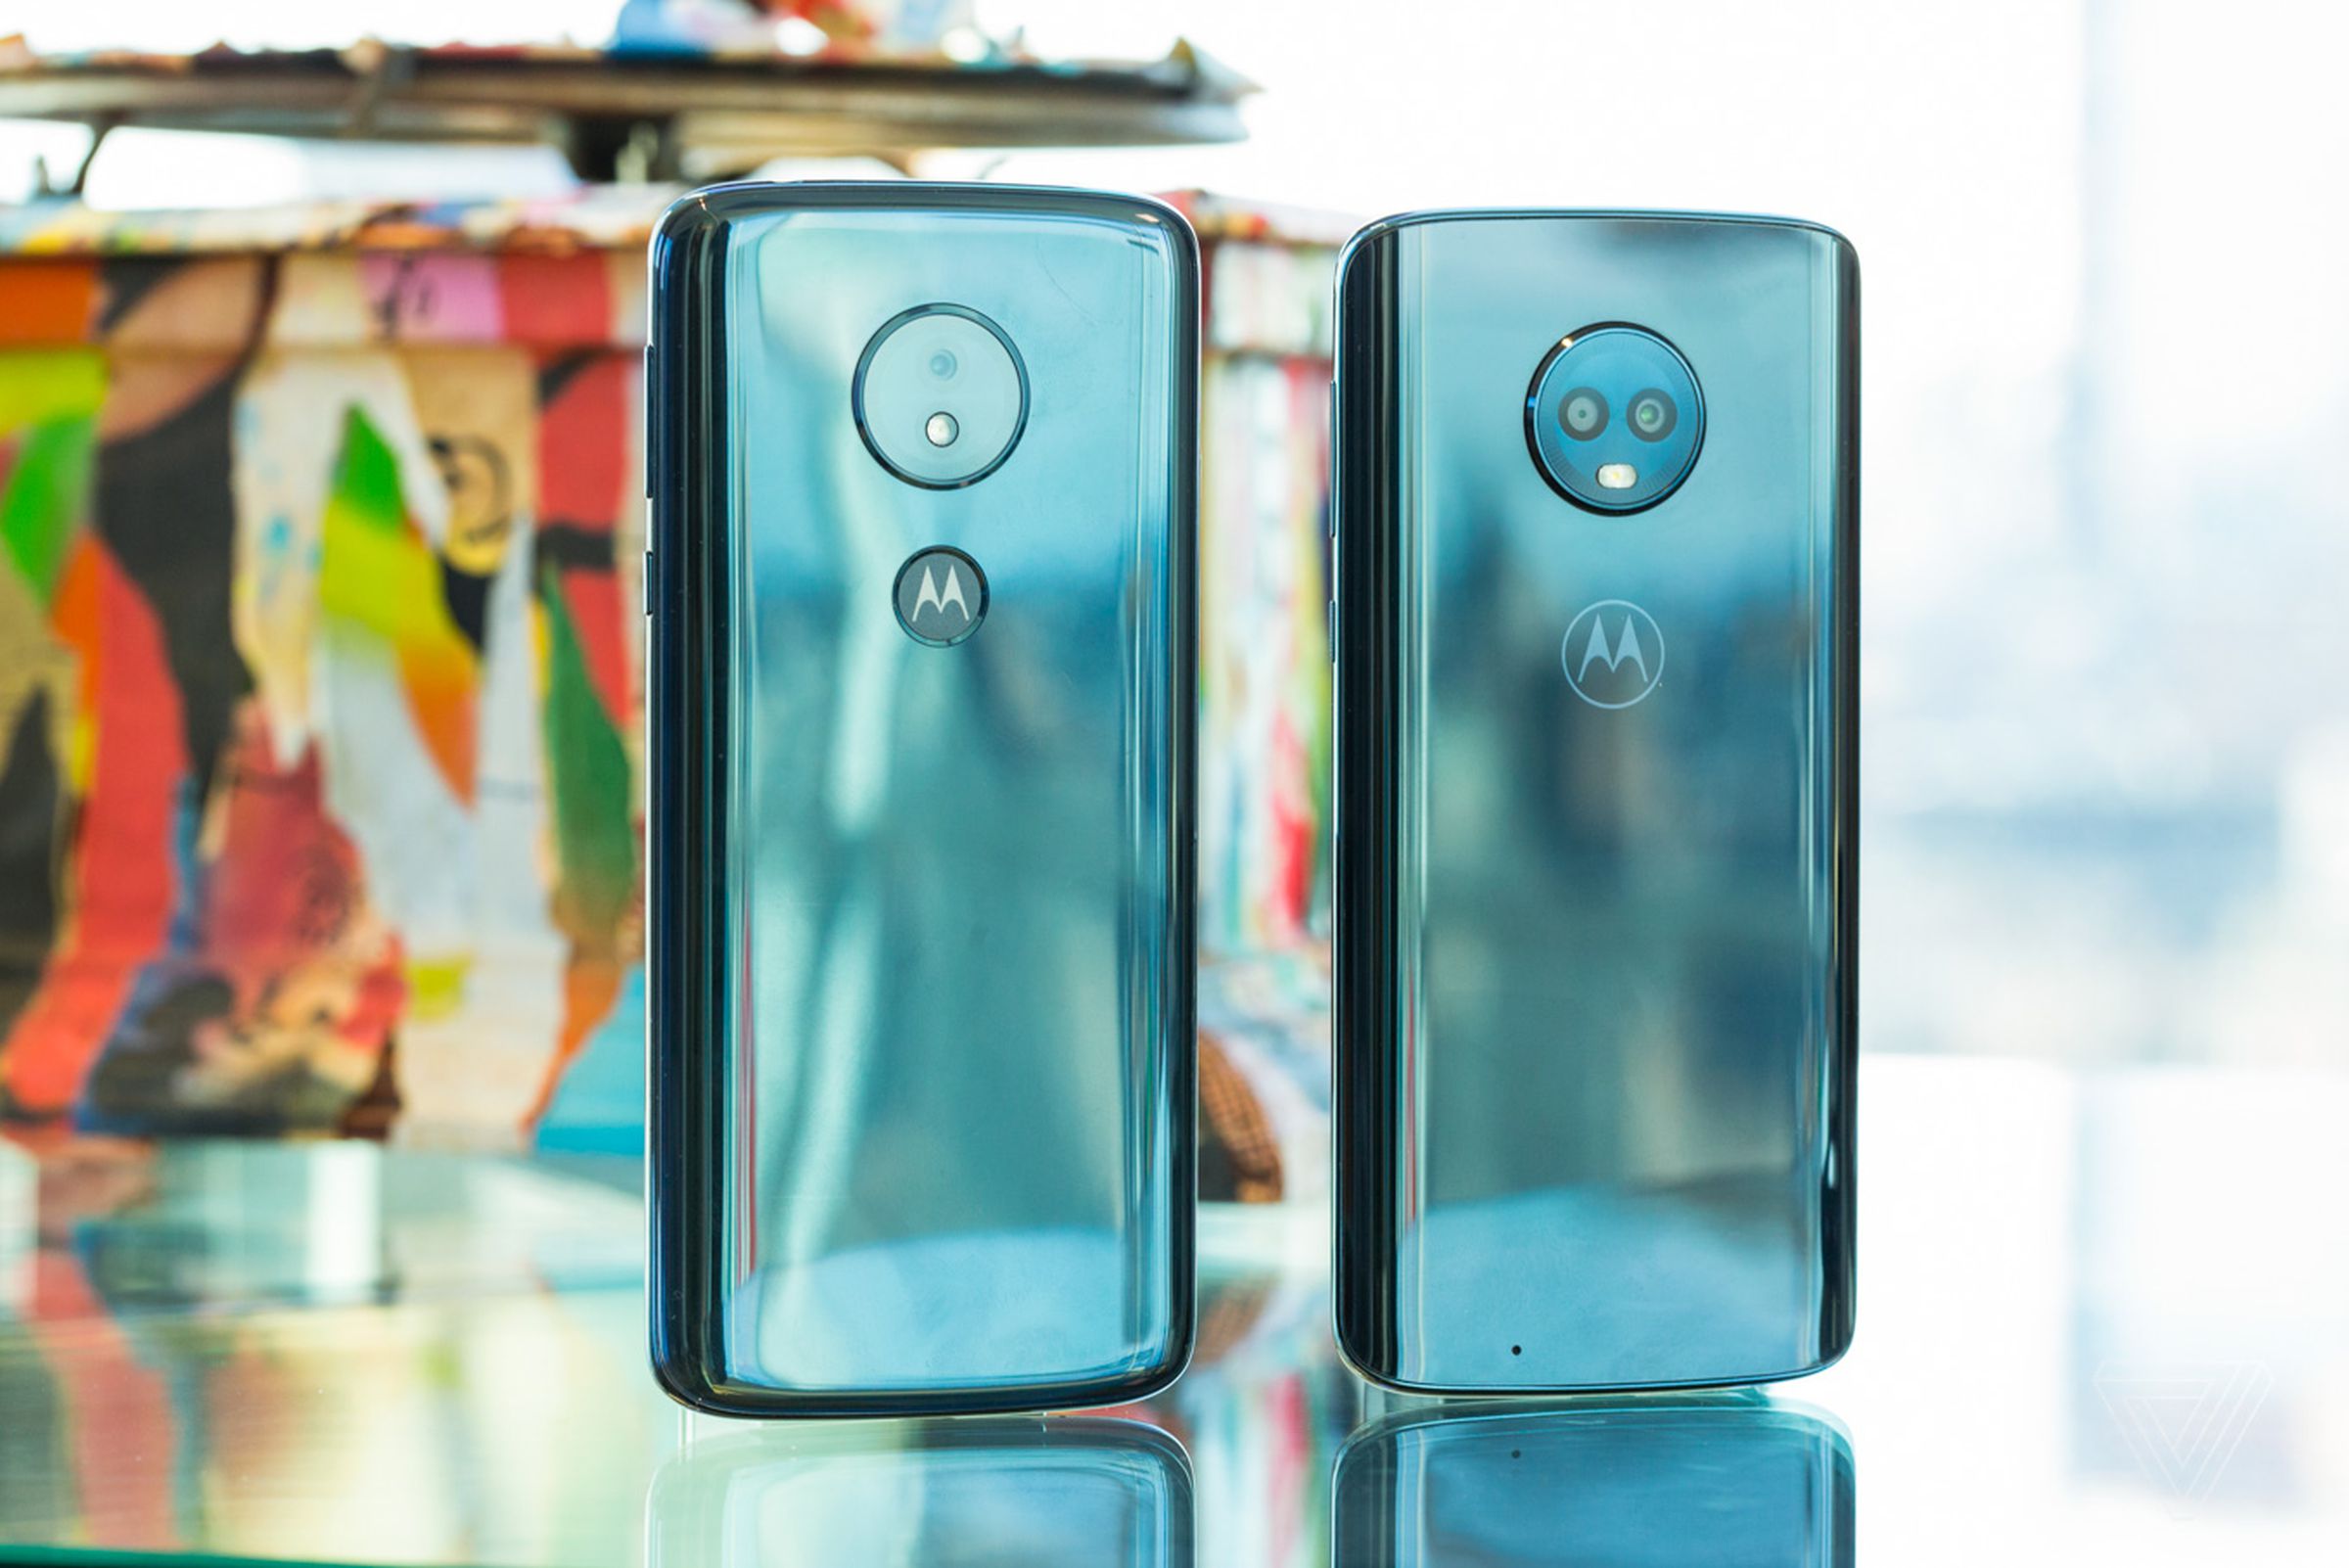 Moto G6 Play (left) and G6 (right)